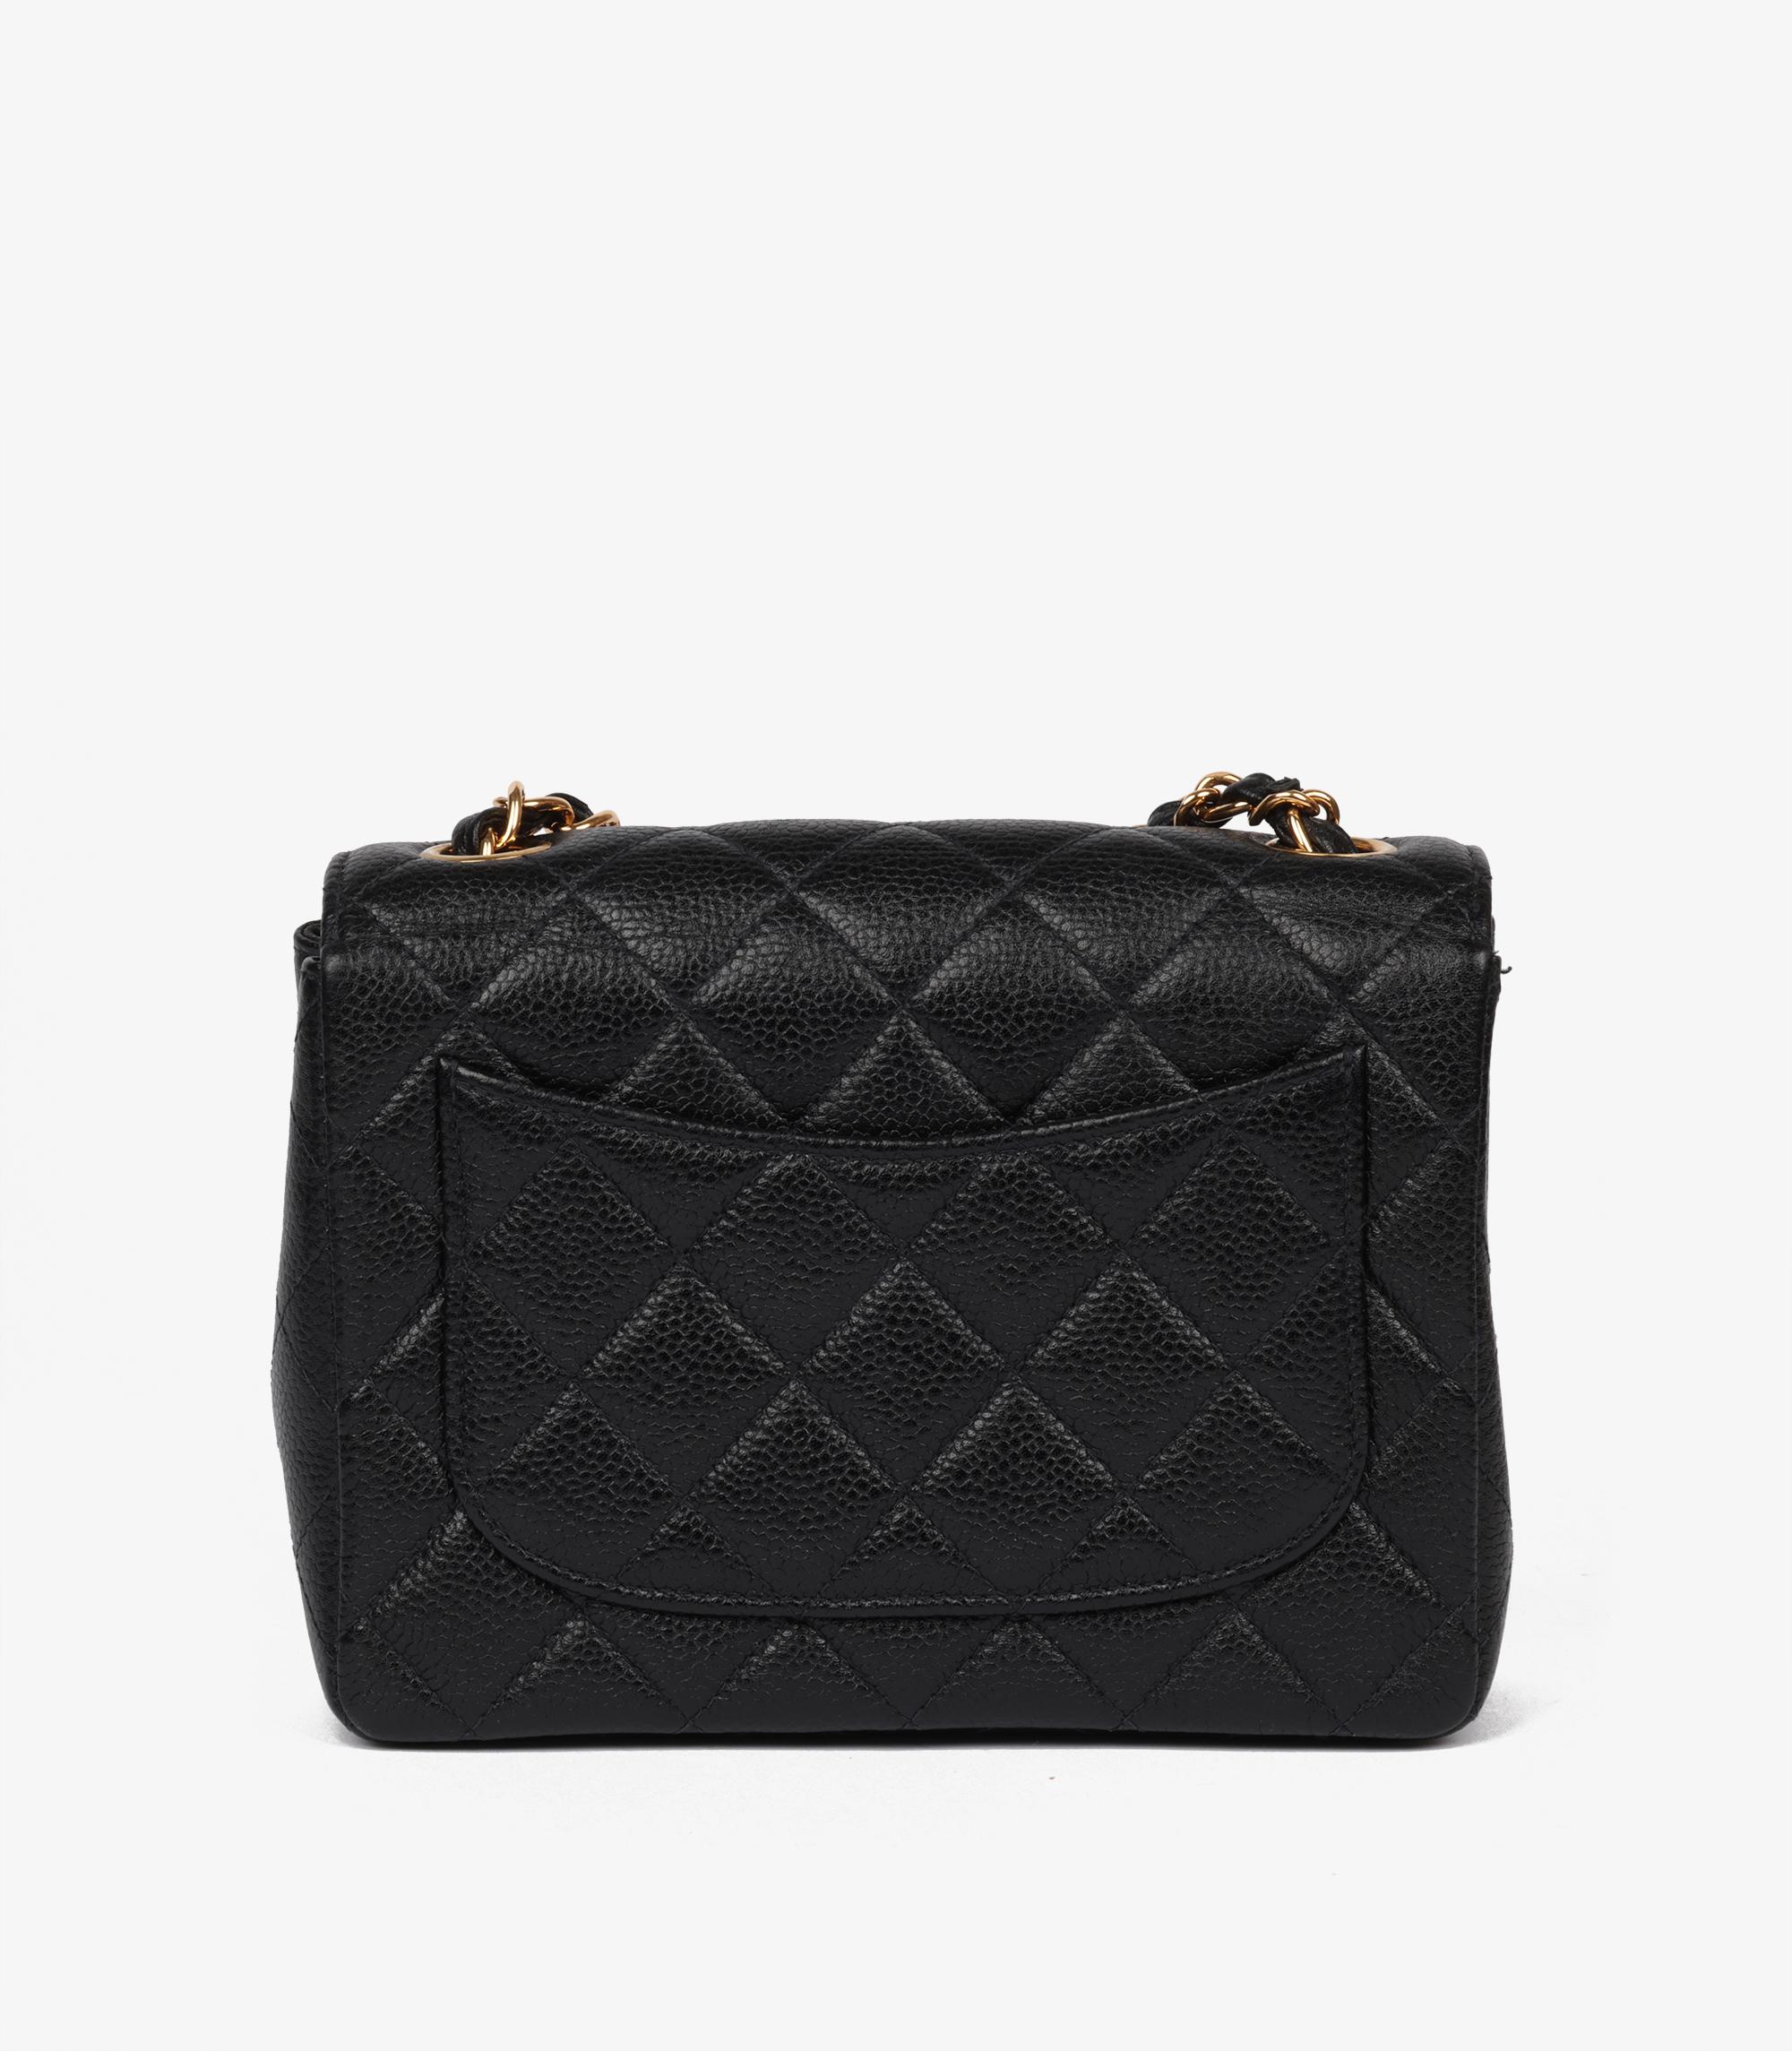 Chanel Black Quilted Caviar Leather Vintage Square Mini Flap Bag 2